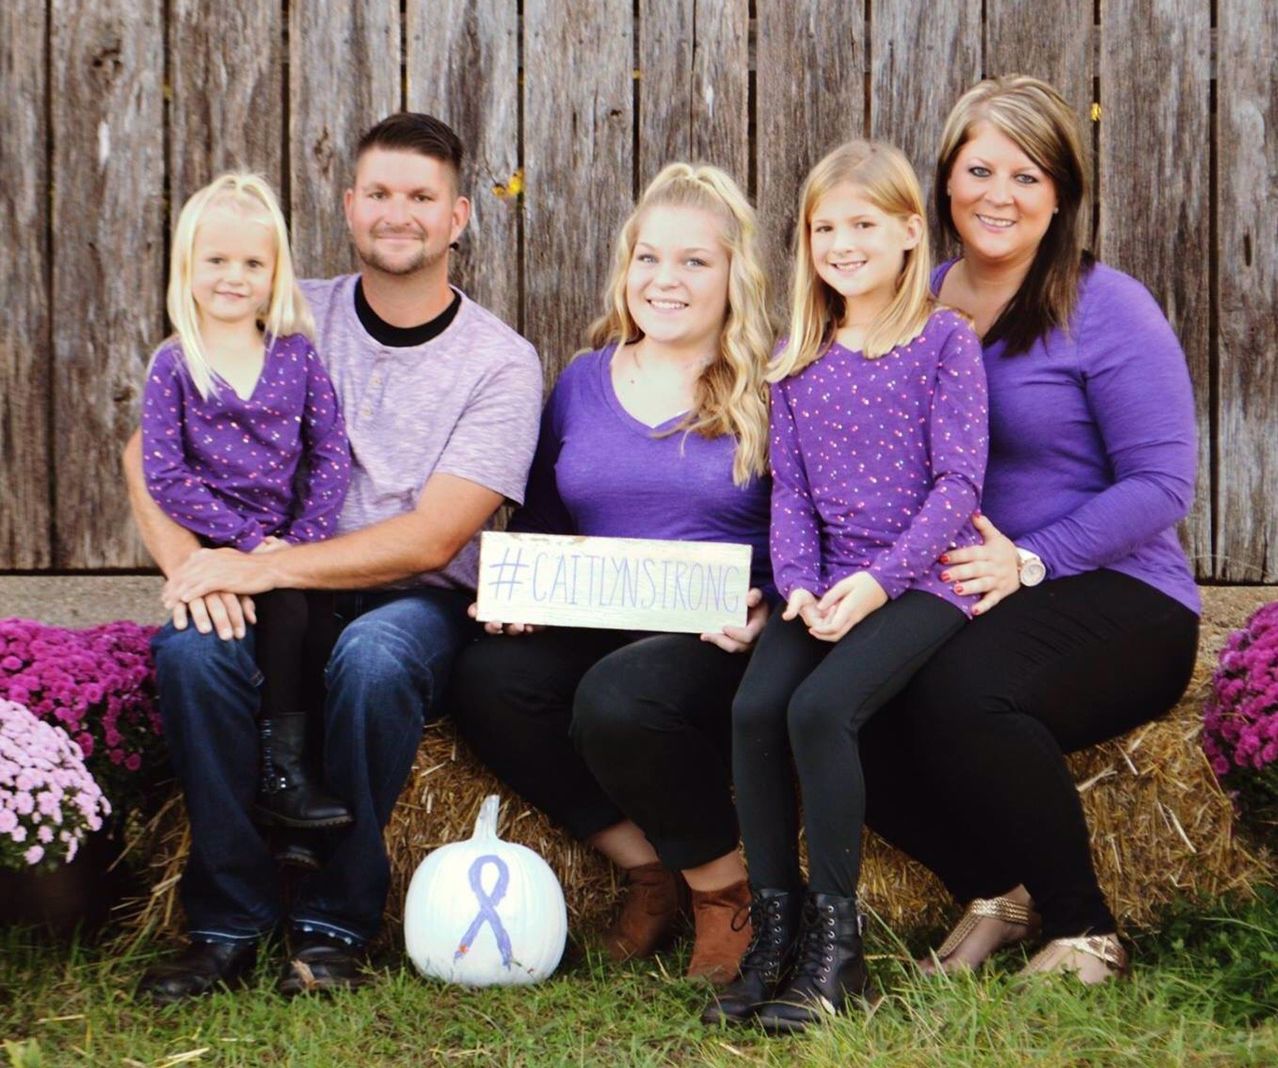 Brodecker family in purple